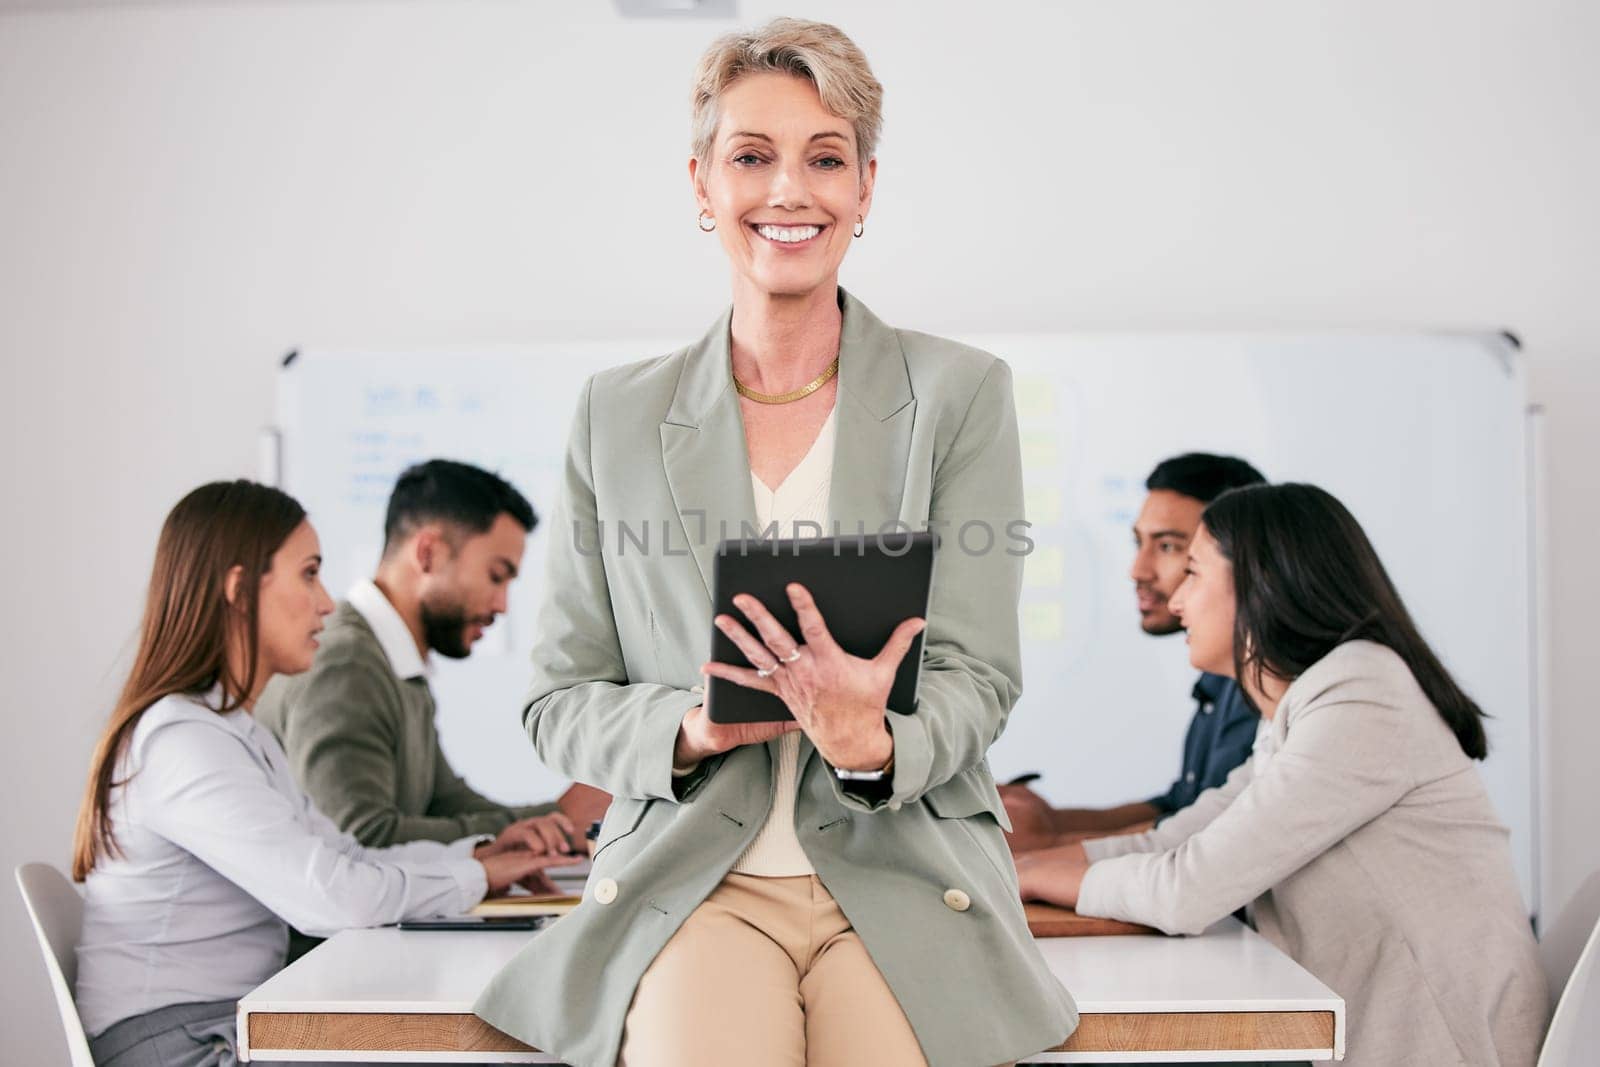 Tablet, meeting and portrait of happy woman or manager for employees engagement, b2b planning and agenda or schedule. Leadership, business management and person with digital technology in office.